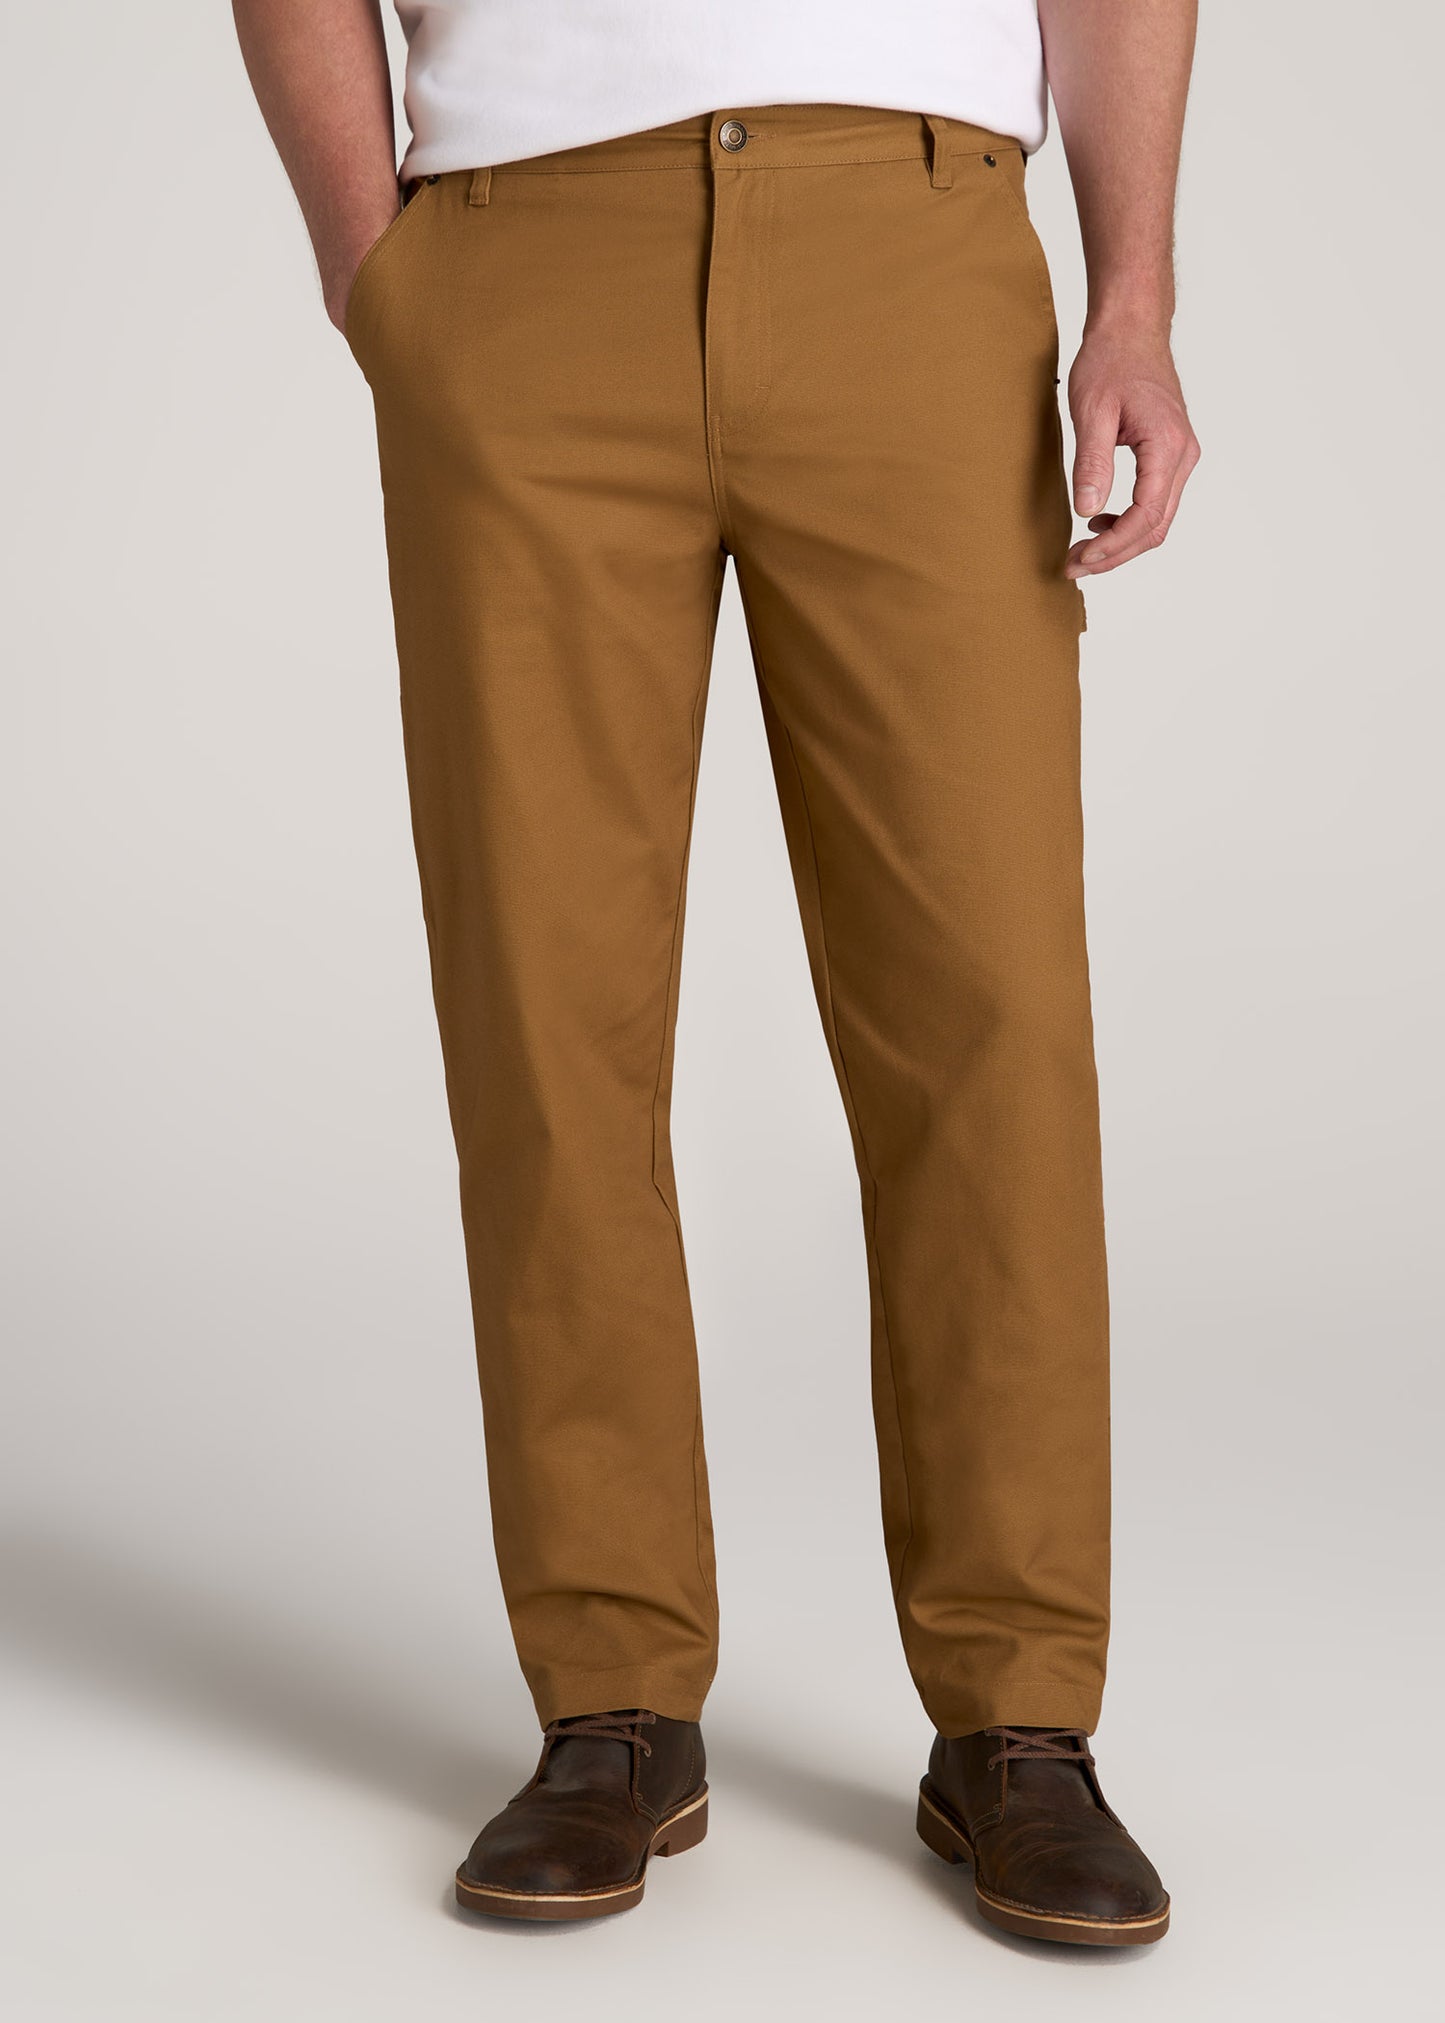 LJ&S Stretch Canvas REGULAR-FIT Carpenter’s Pants for Tall Men in Dusty Brown